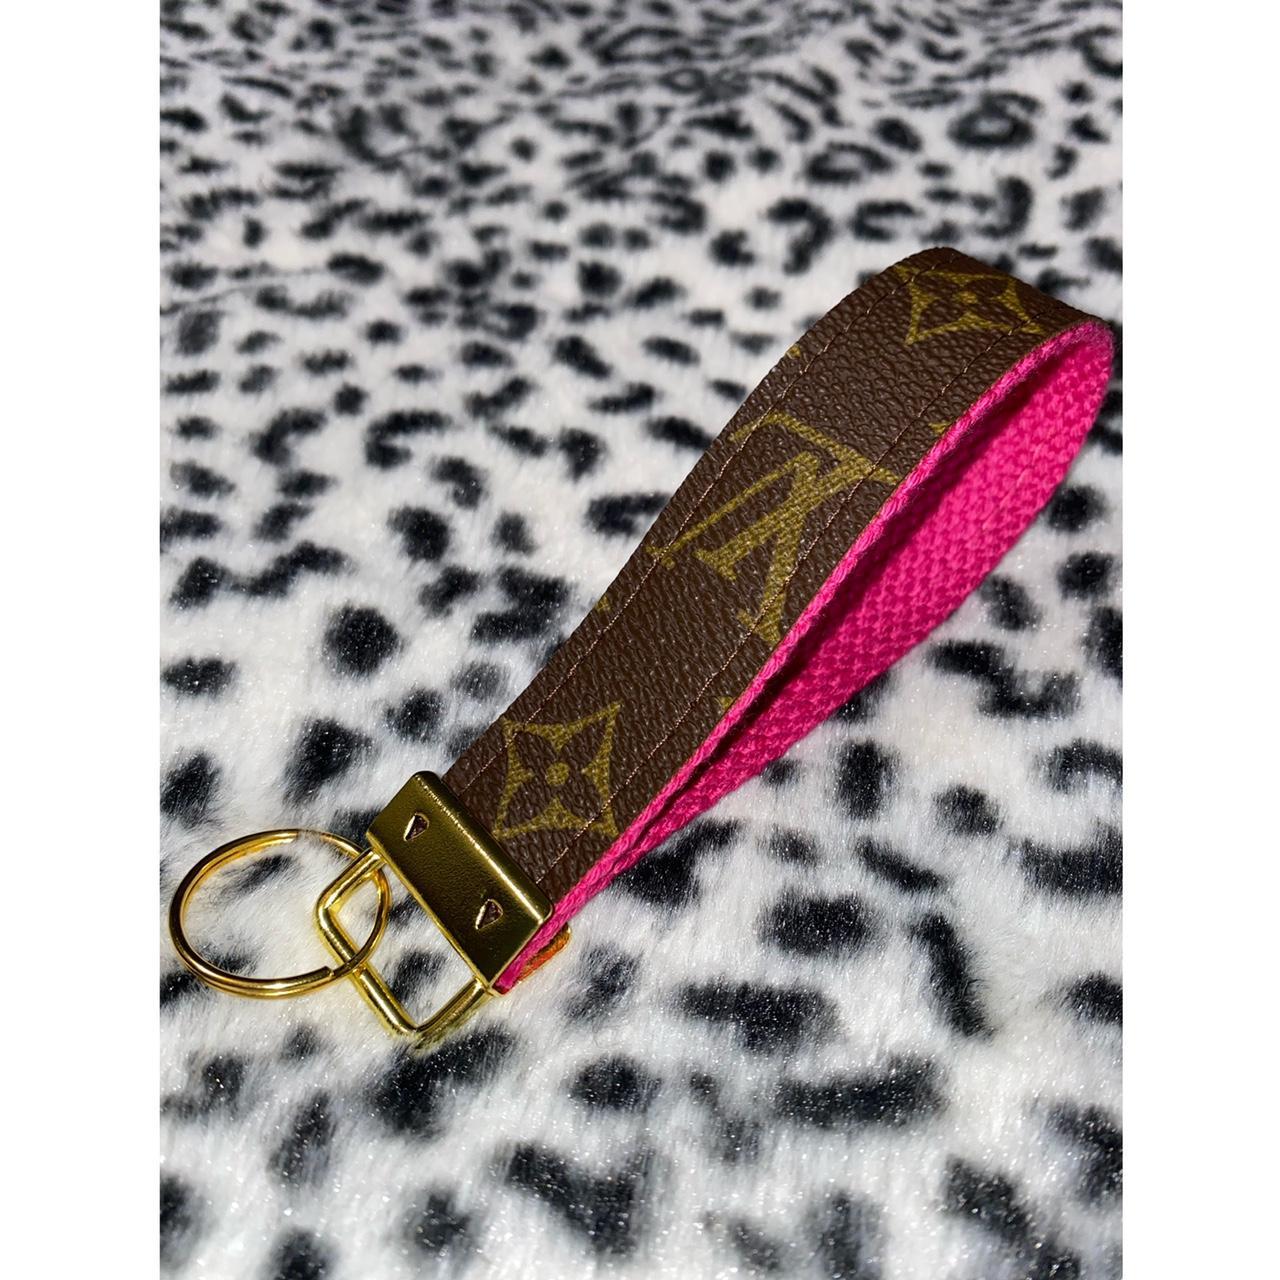 Women's Pink and Brown Accessory (2)